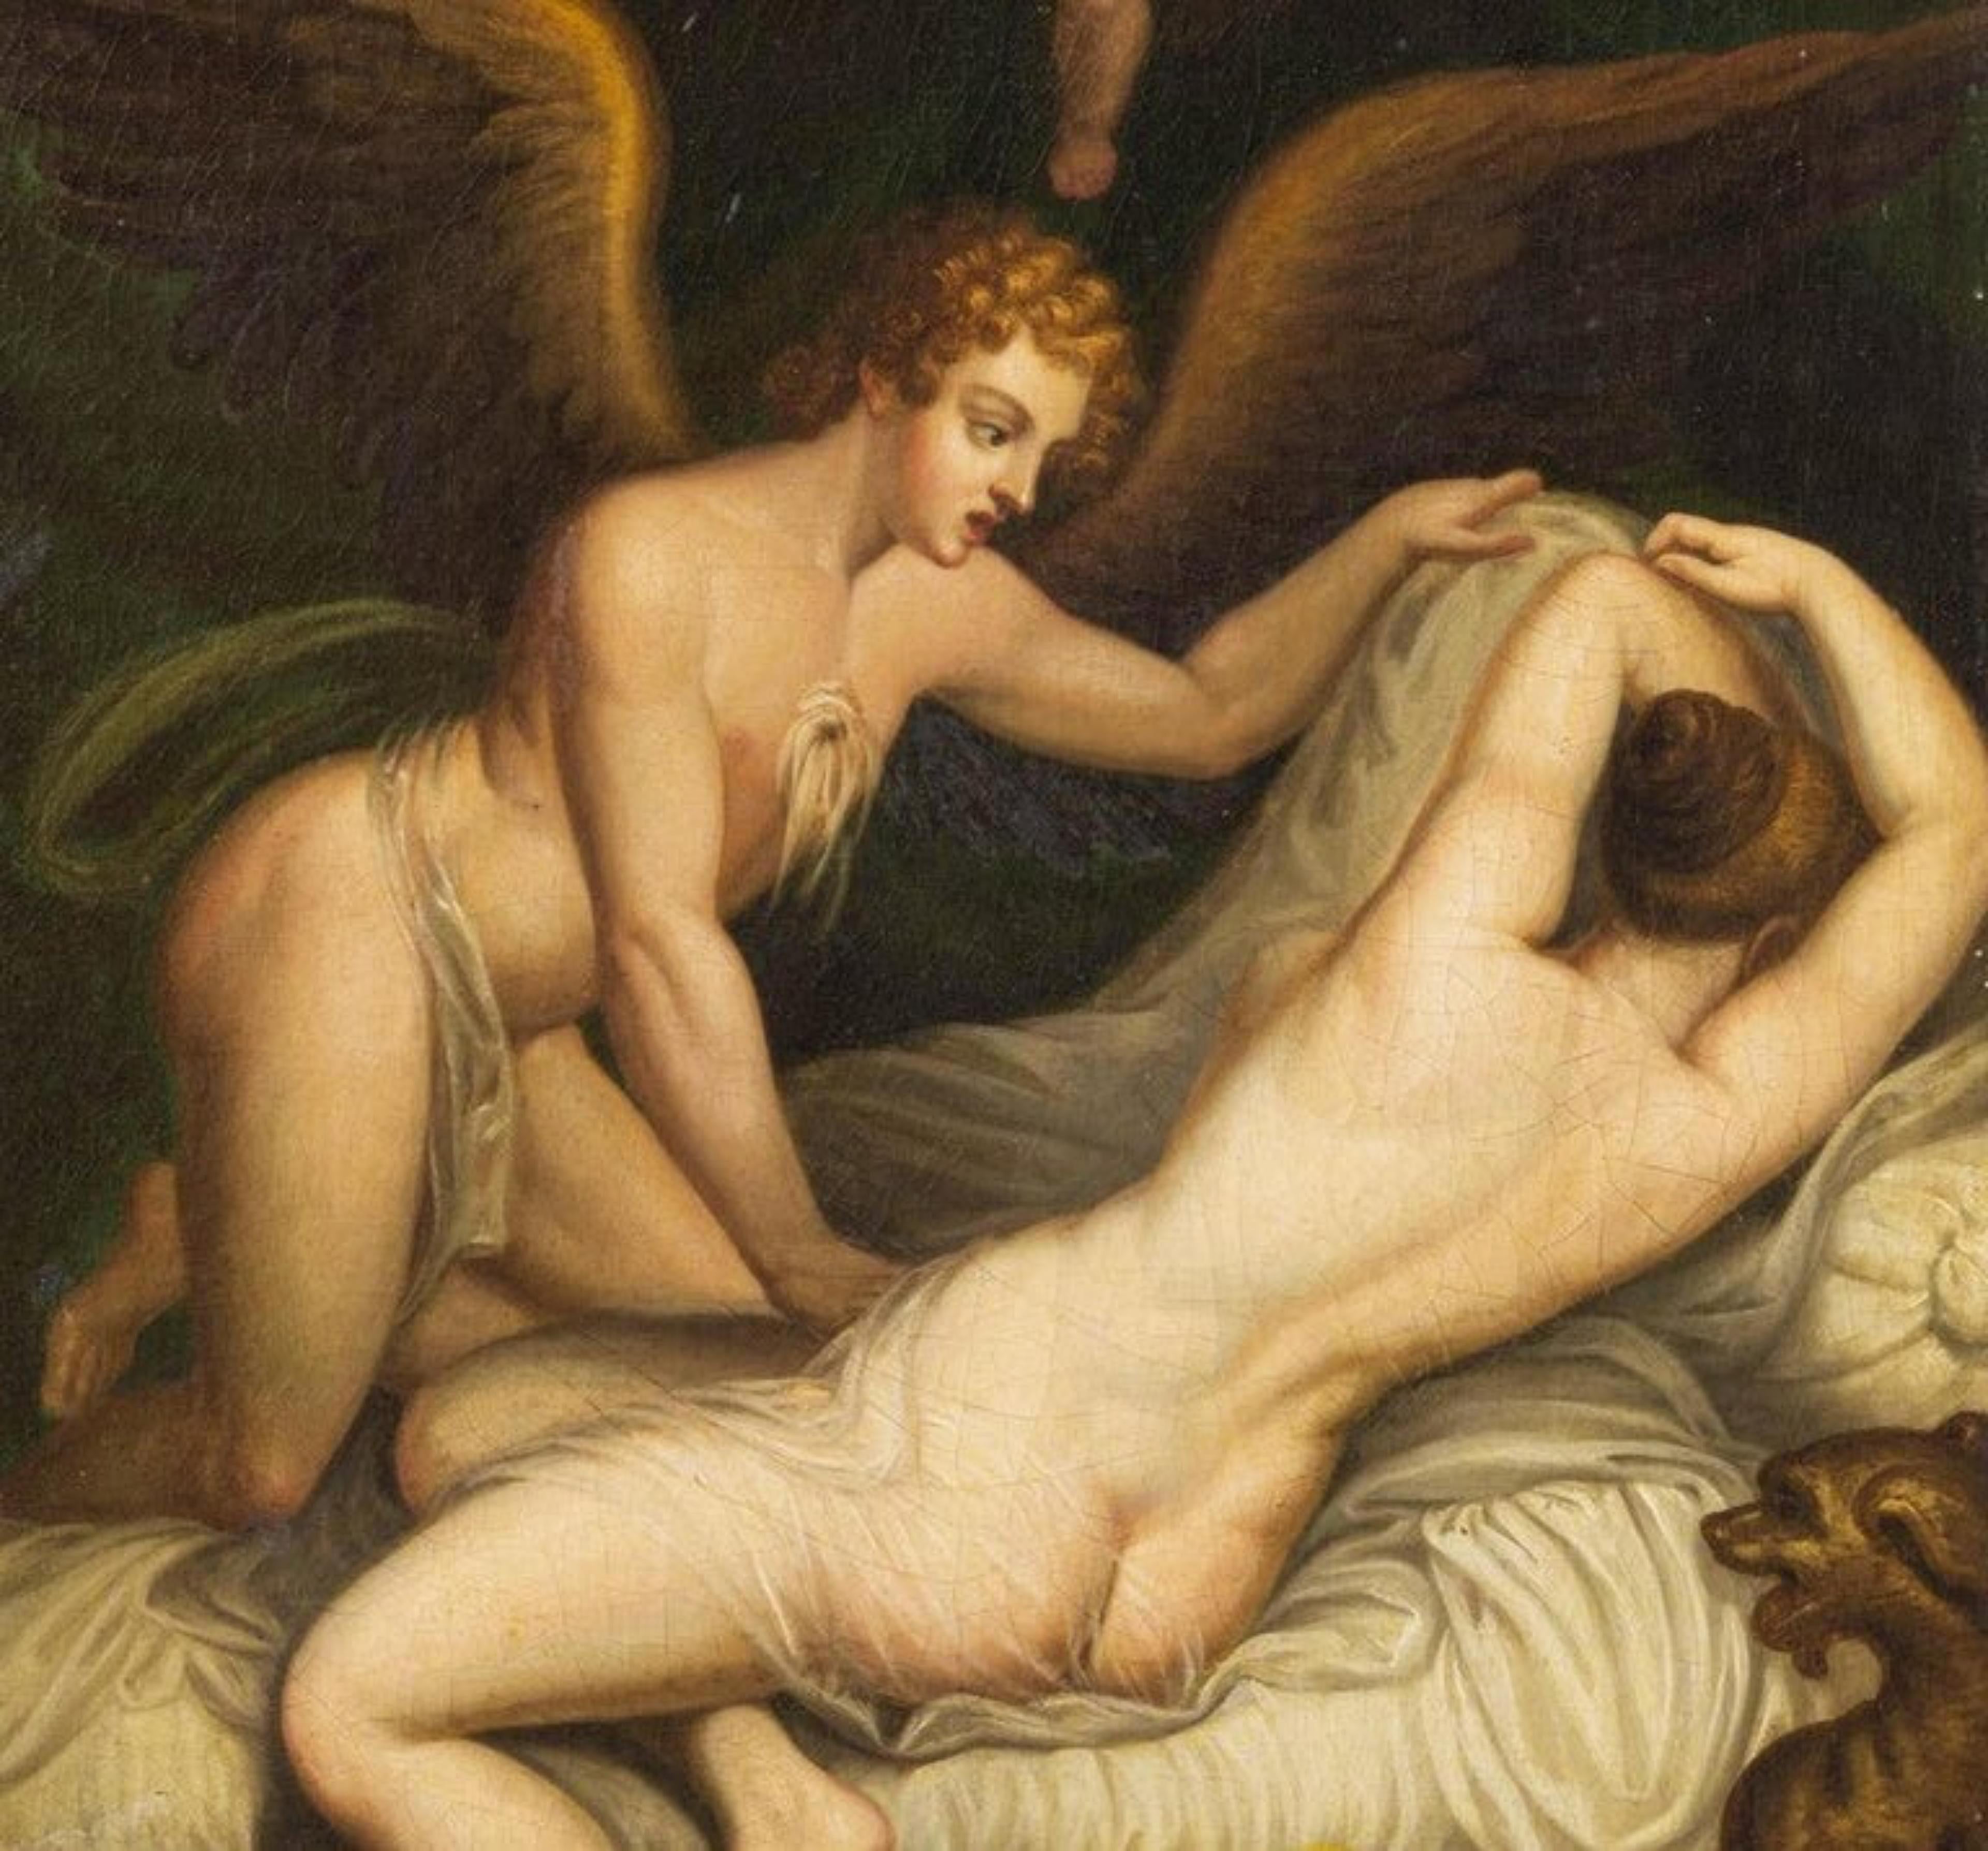 Venus and cupid 19th century.

French school.
oil on canvas.
Dimension: 66 x 51 cm.
Good conditions.